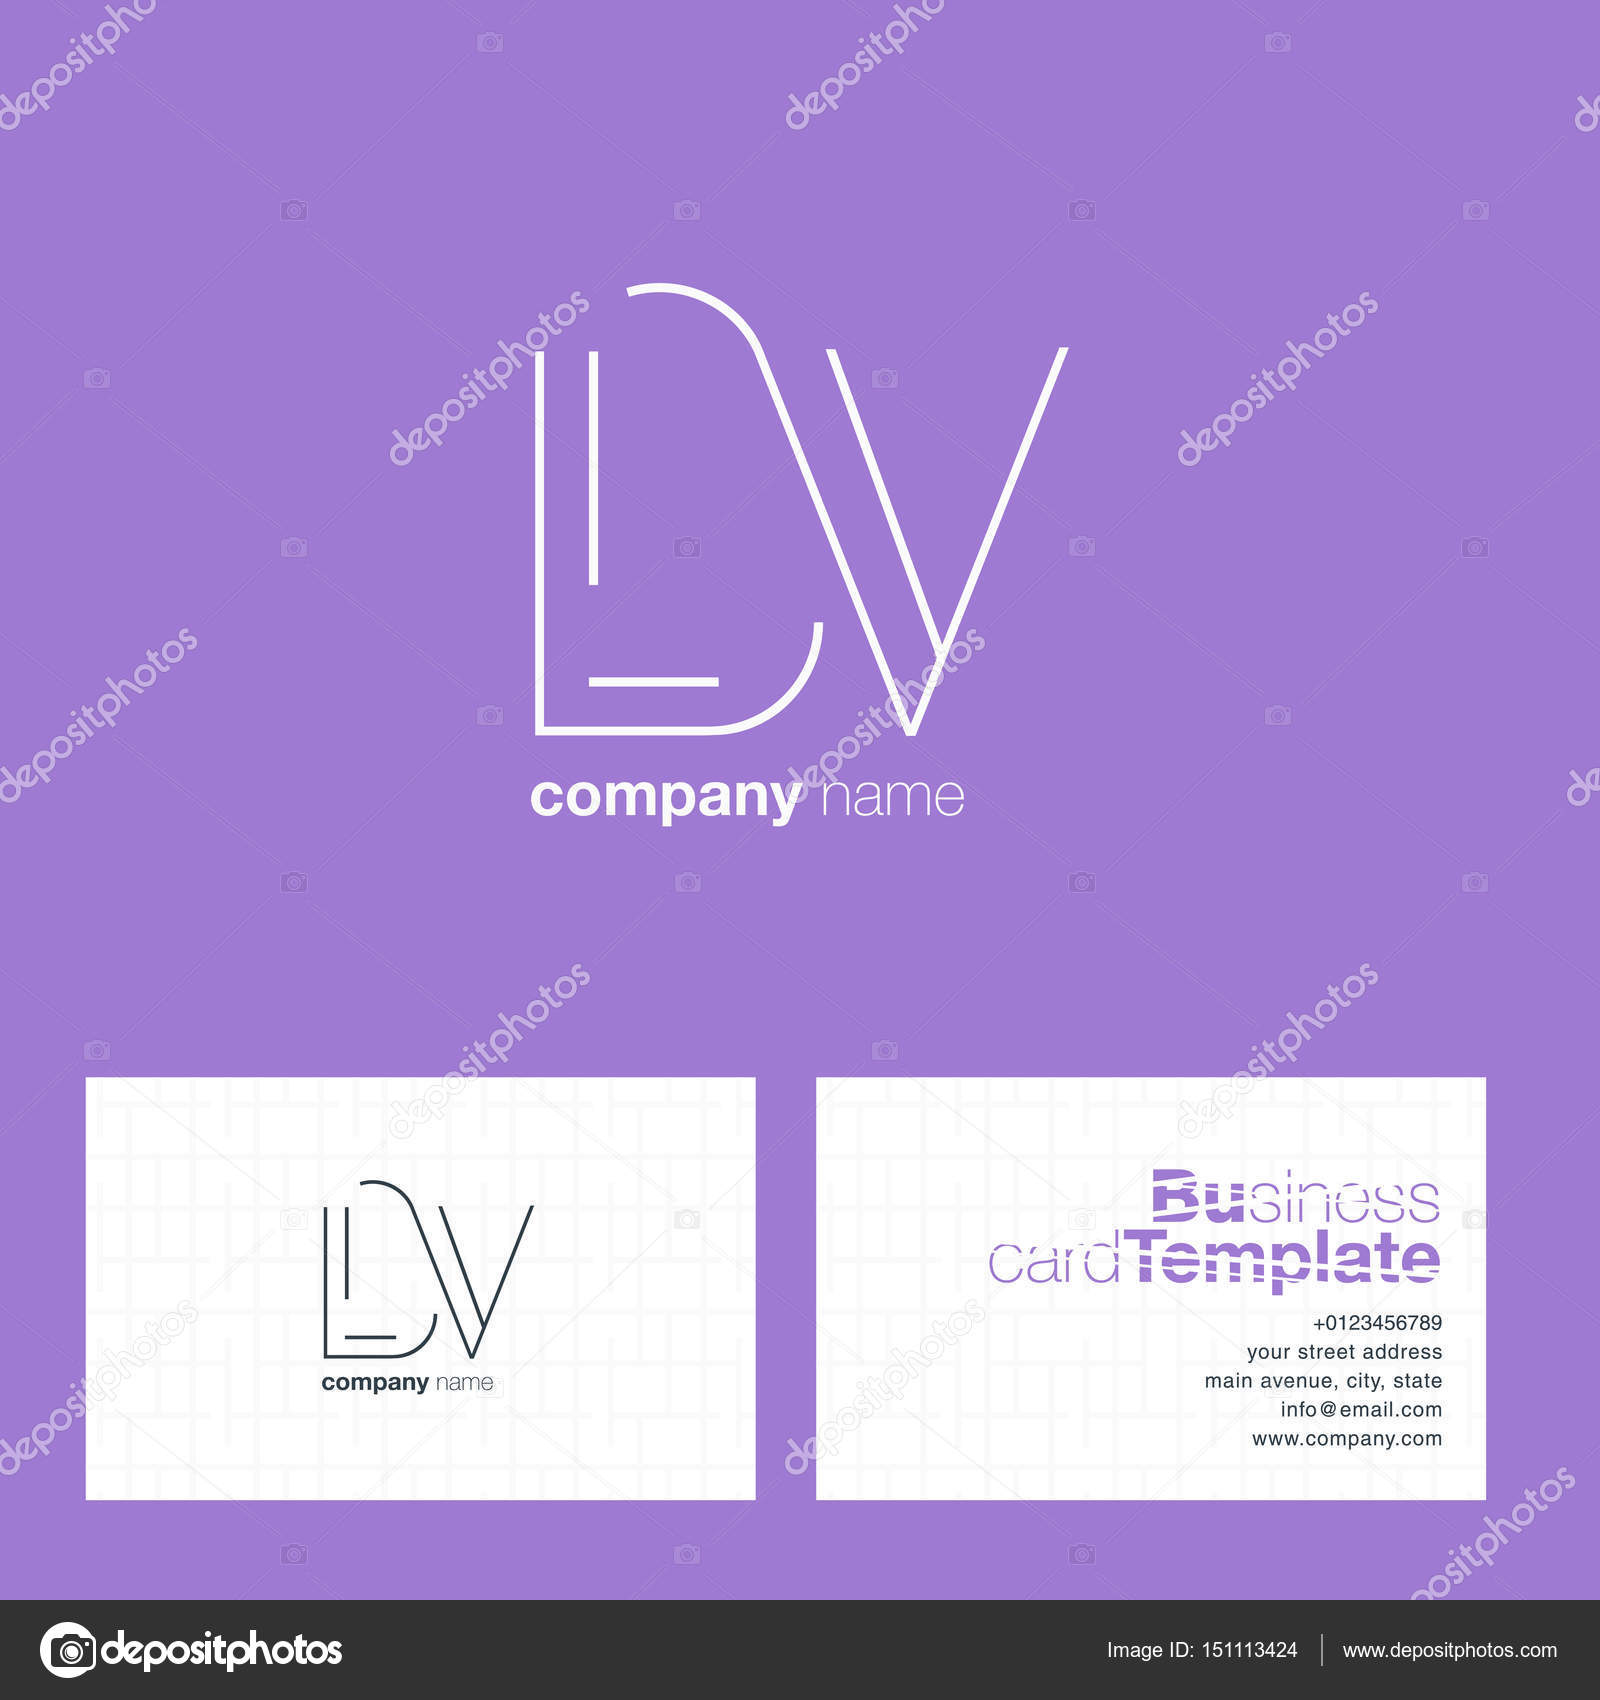 lv business card